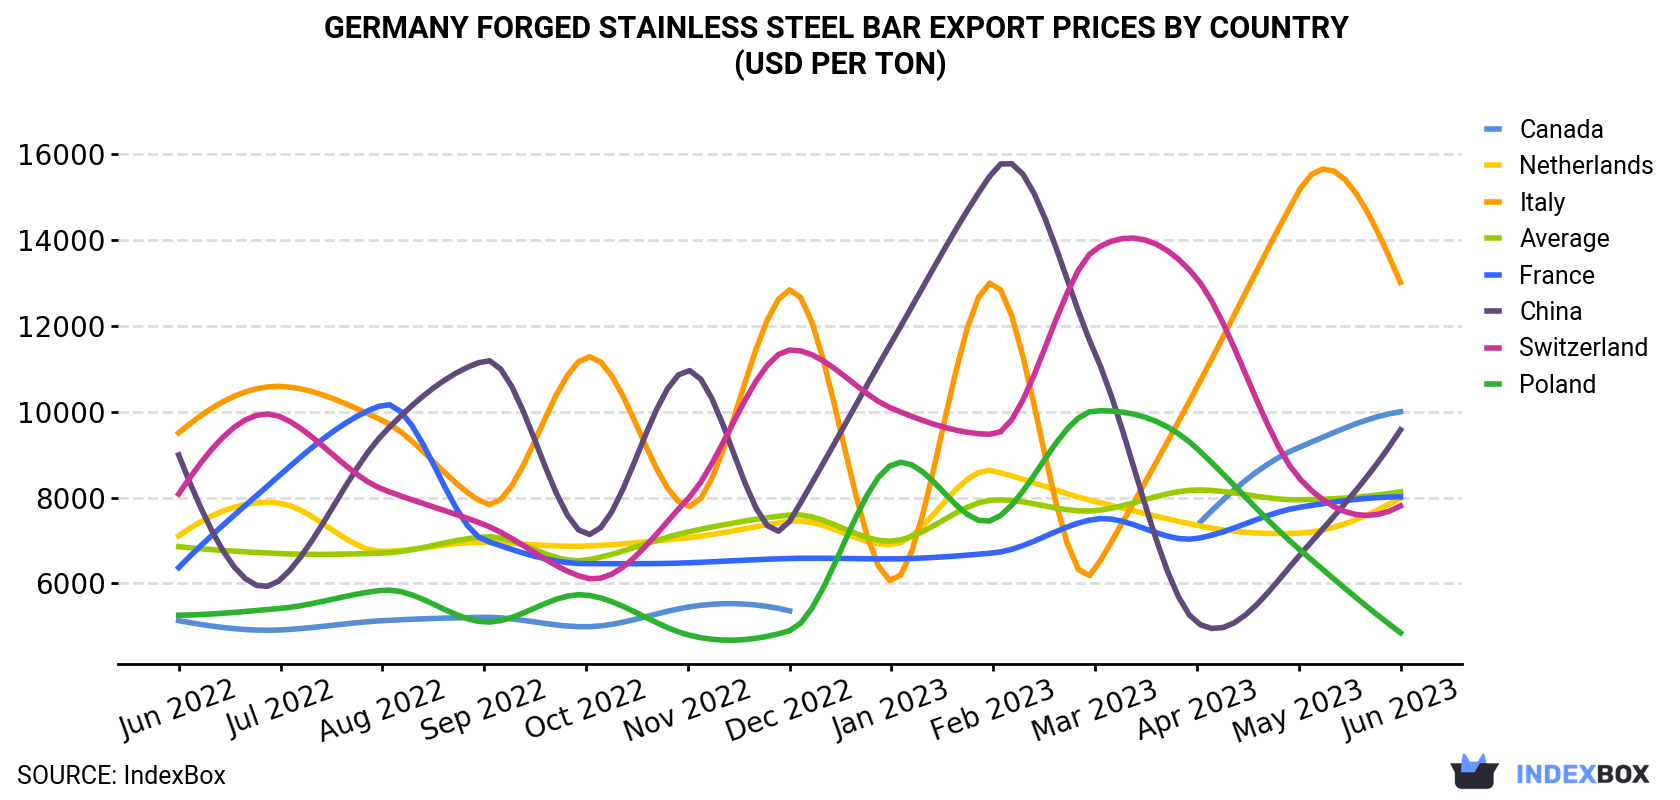 Germany Forged Stainless Steel Bar Export Prices By Country (USD Per Ton)